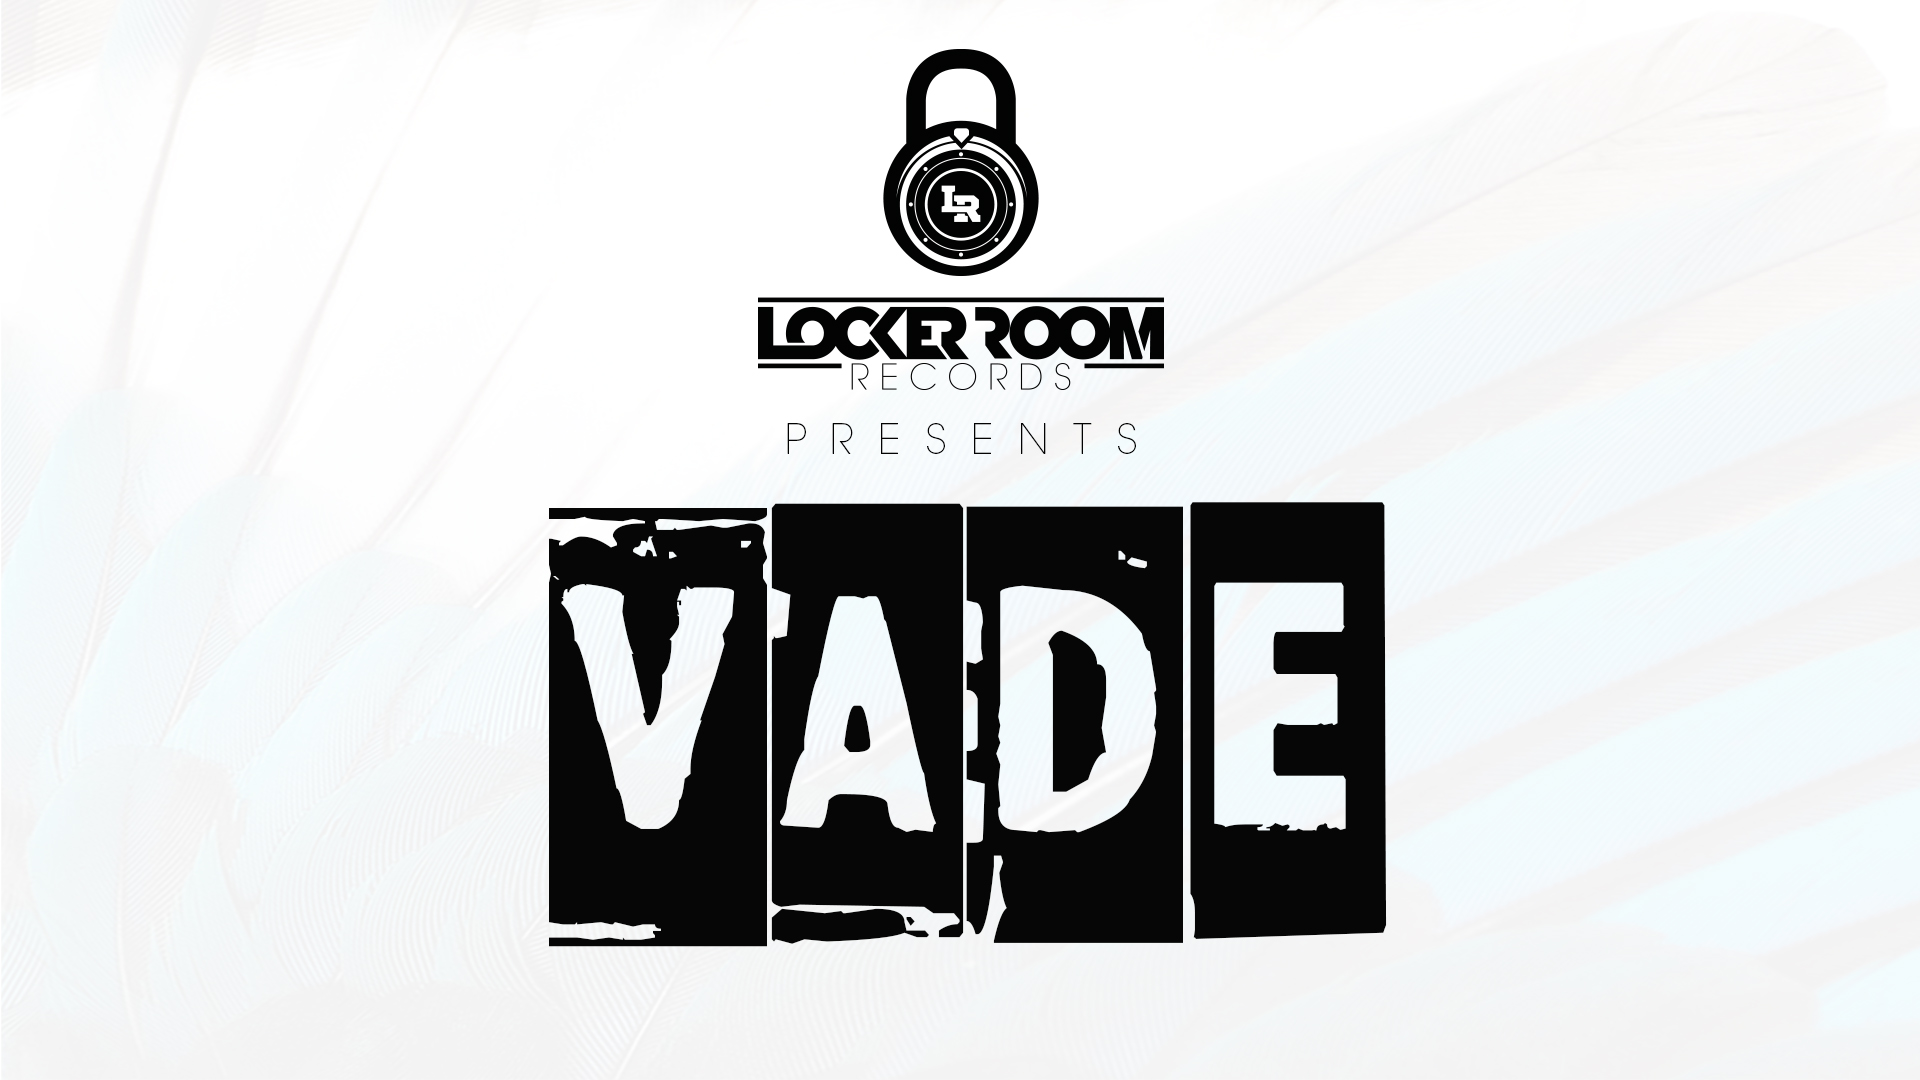 EVENT :: VADE @ The Magic Roundabout, London – Sat 12th March